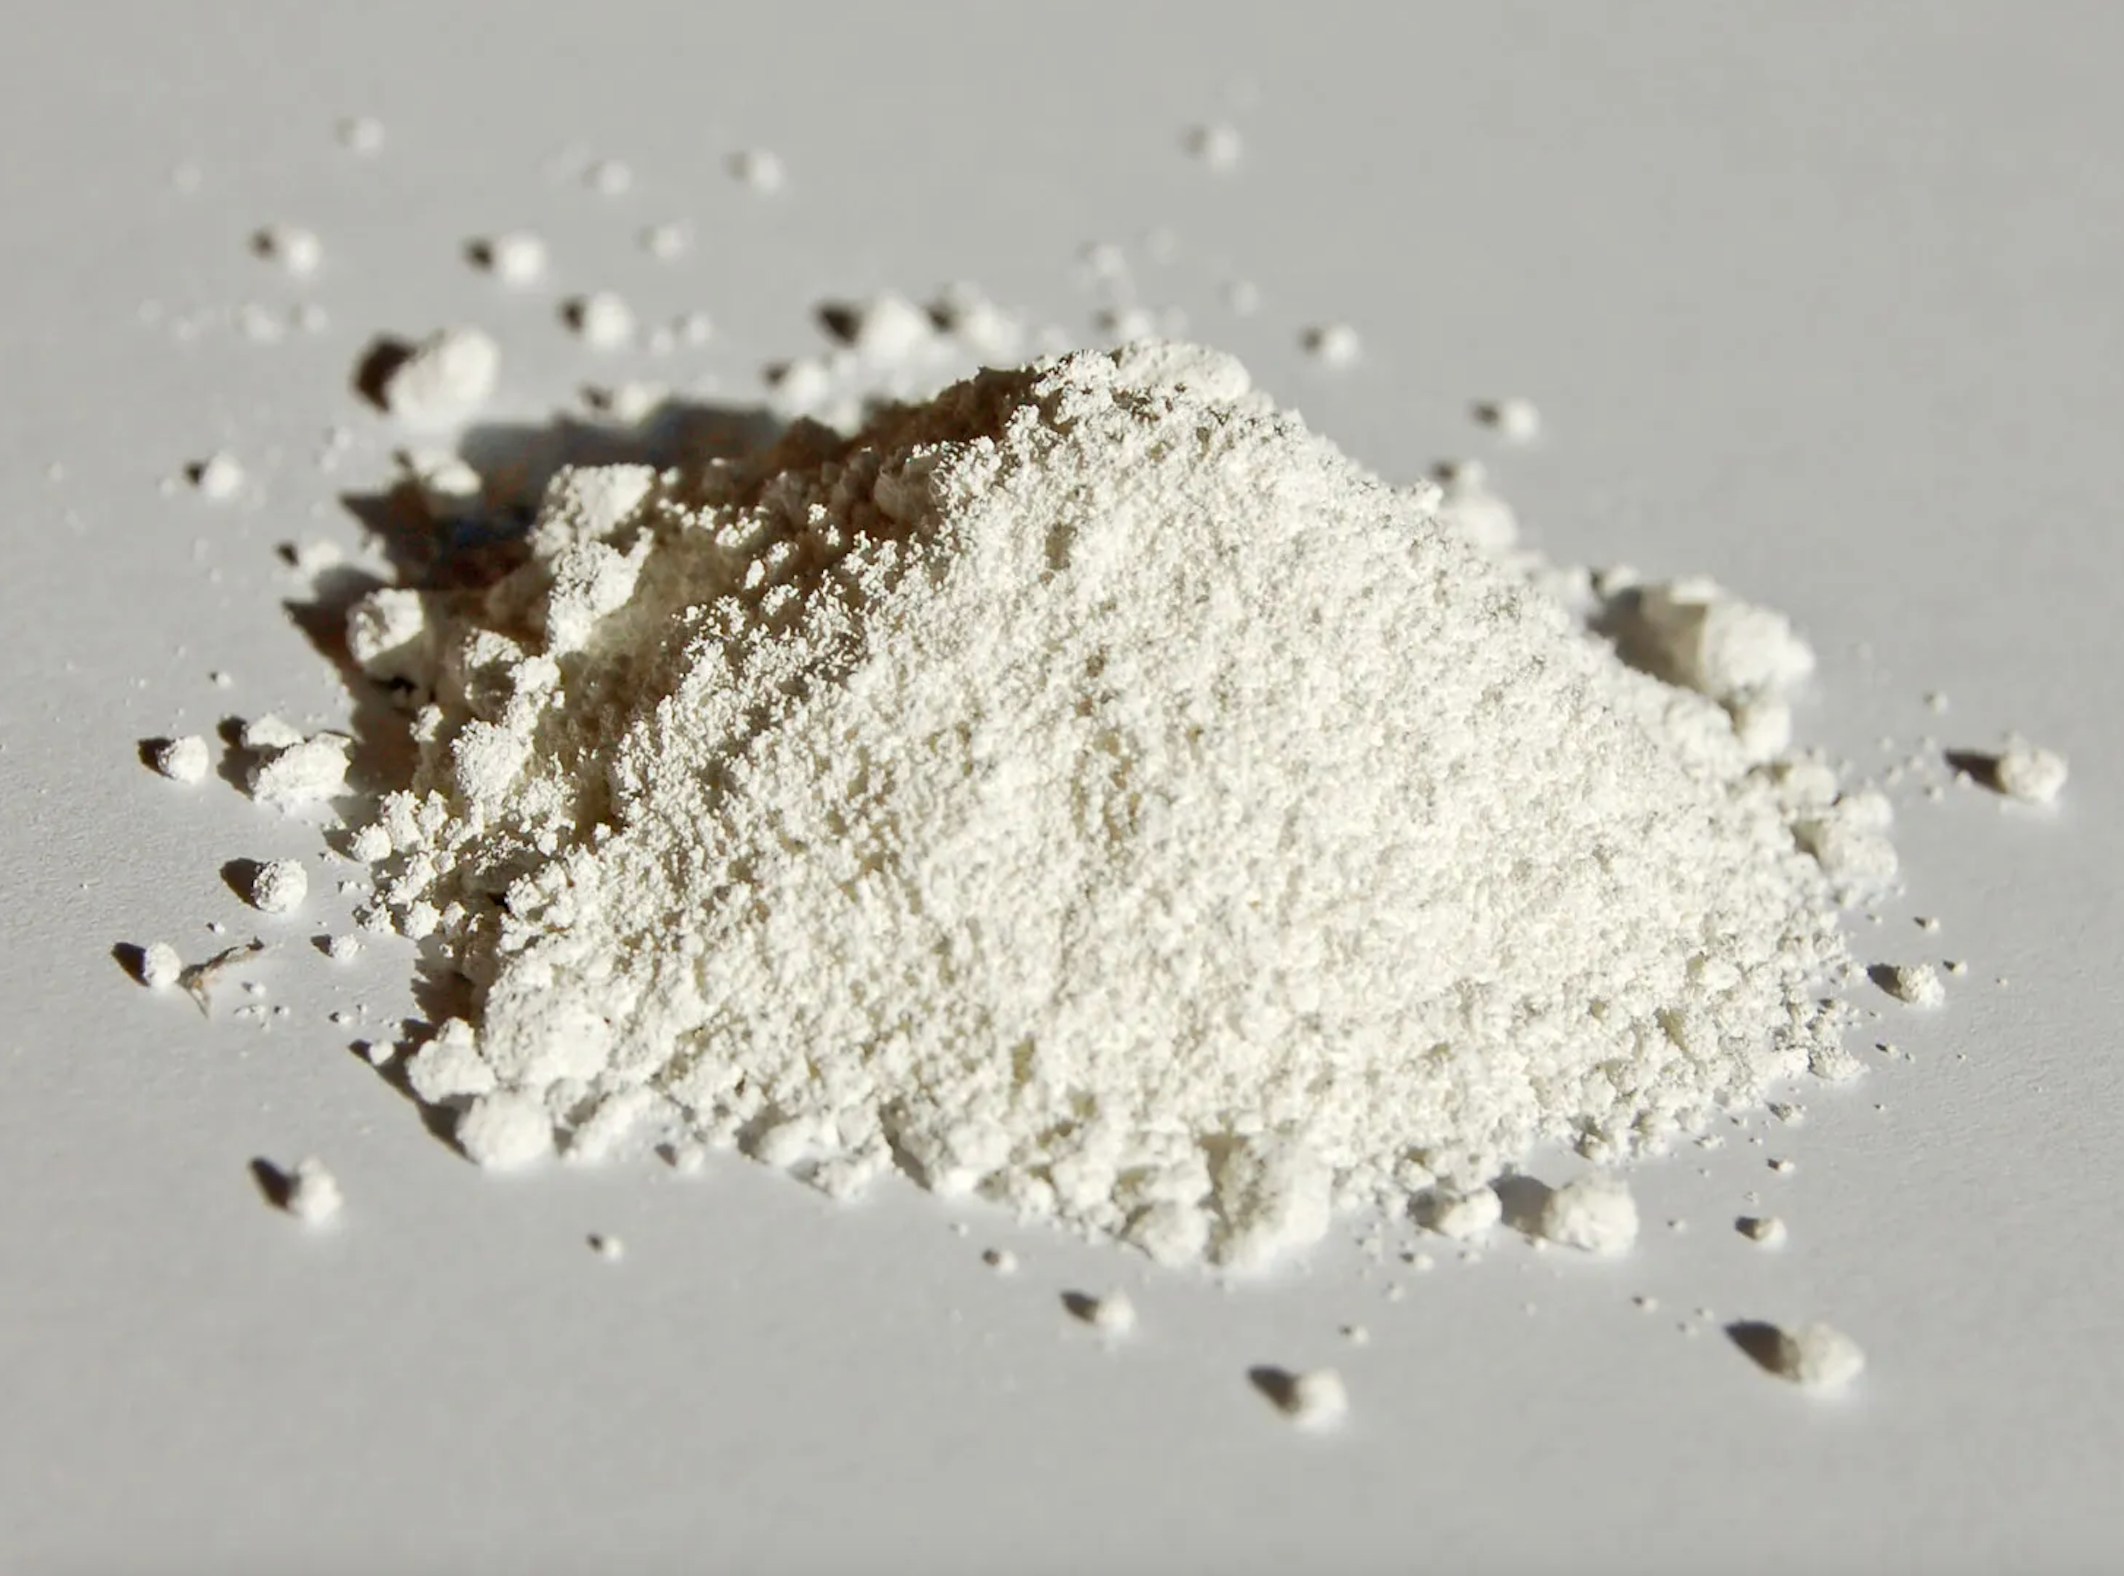 A small pile of white powder on a plain surface. The powder has a fine, grainy texture and is spread slightly around the main pile. The background is a clean, flat surface.